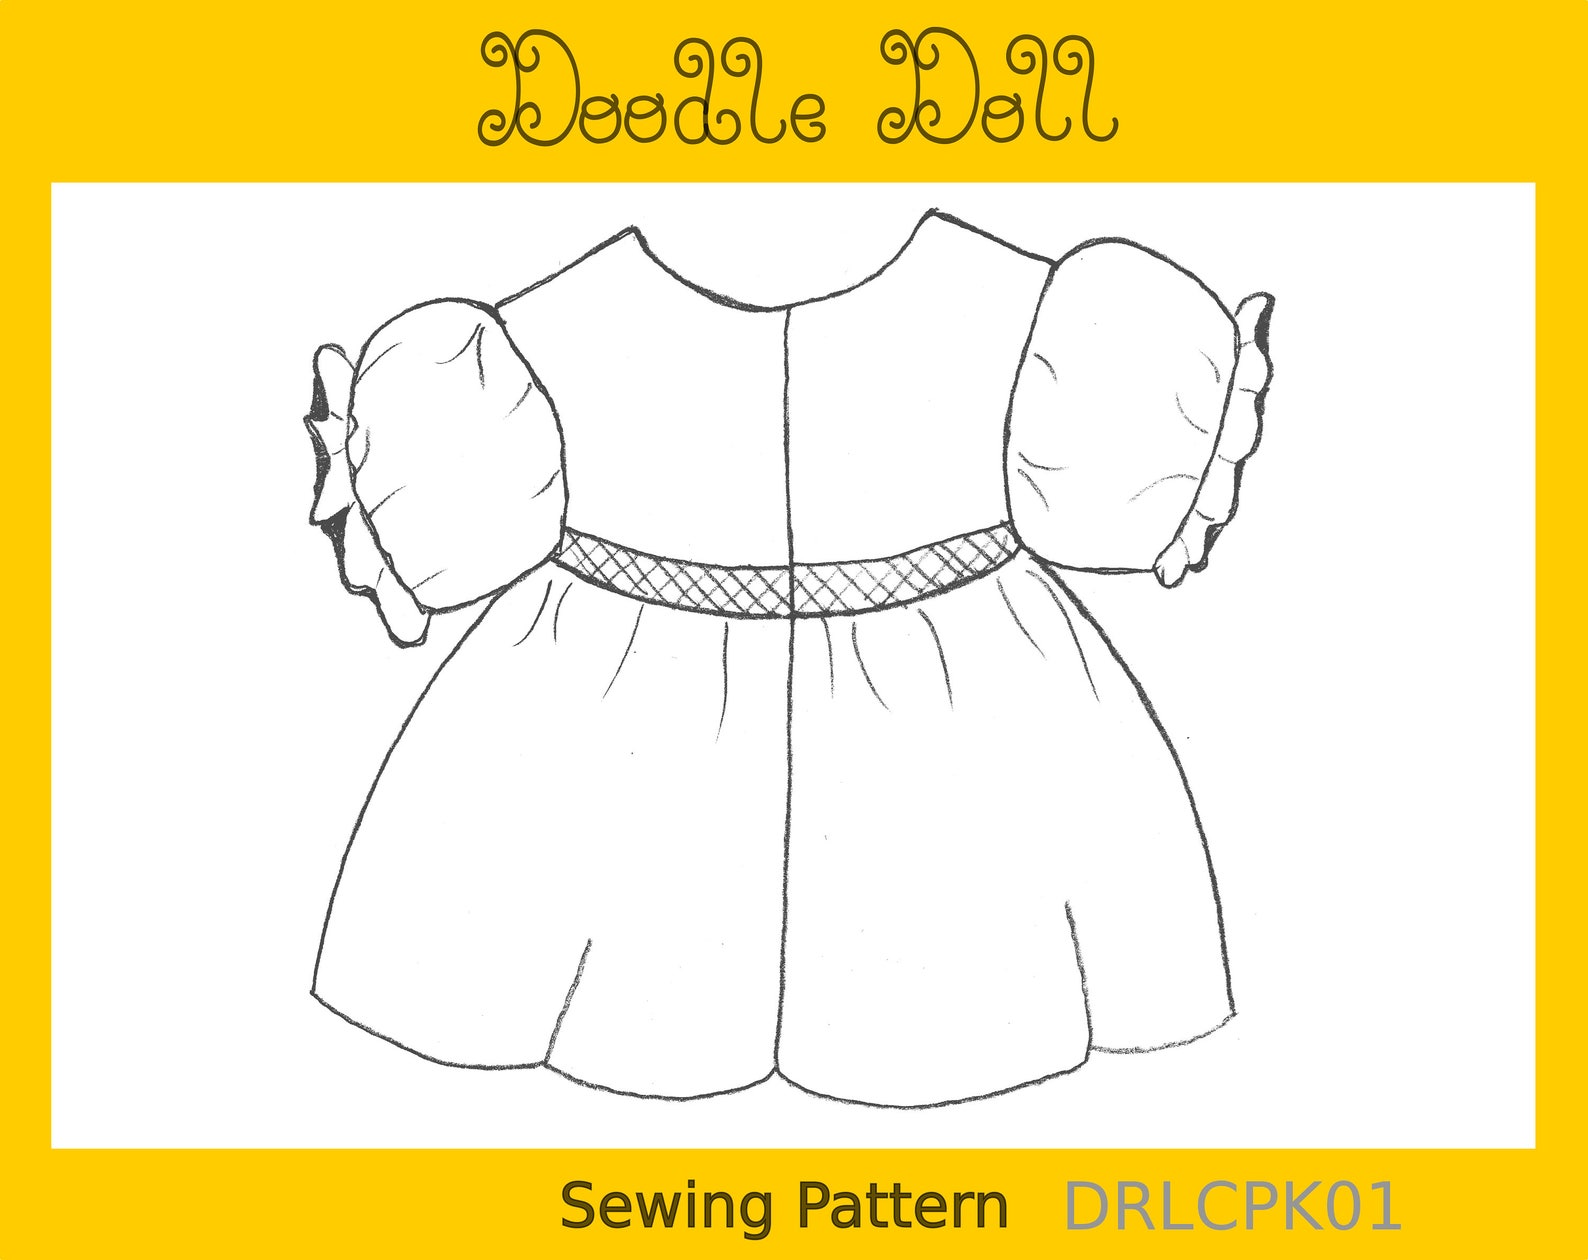 cabbage-patch-kids-doll-clothes-sewing-pattern-pdf-retro-doll-etsy